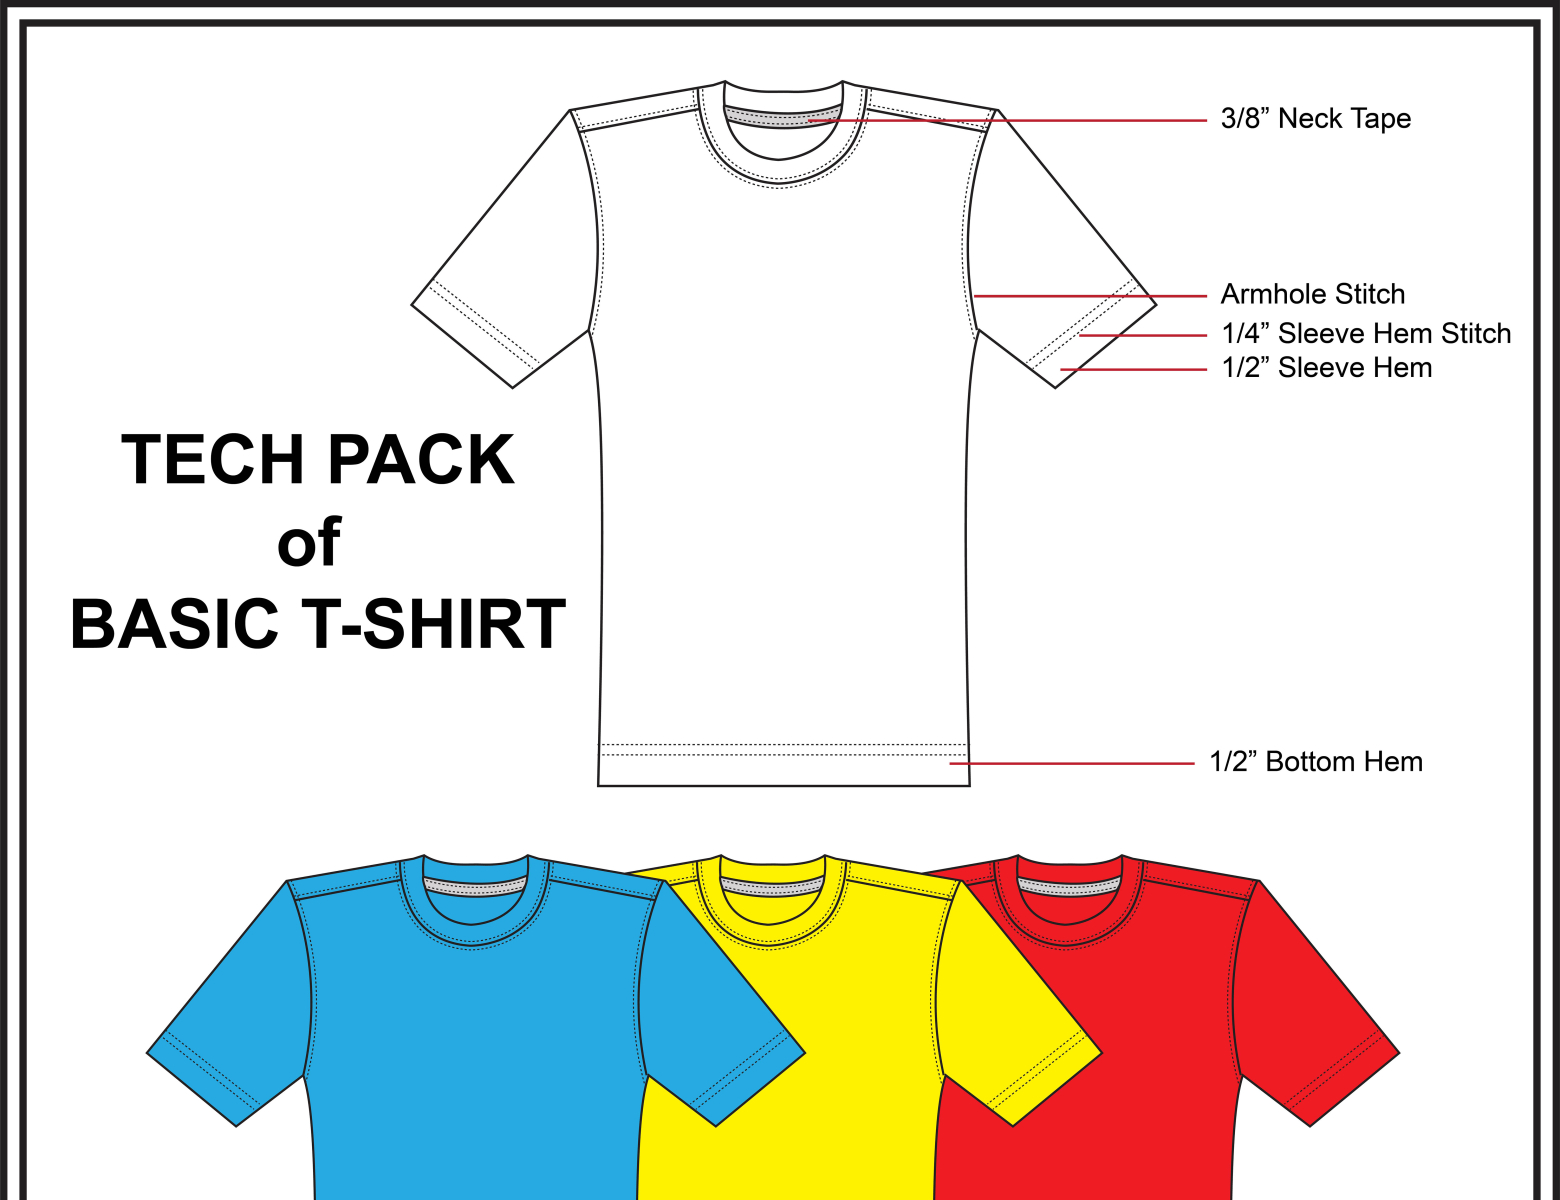 basic-t-shirt-tech-pack-by-anwar-bappy-on-dribbble